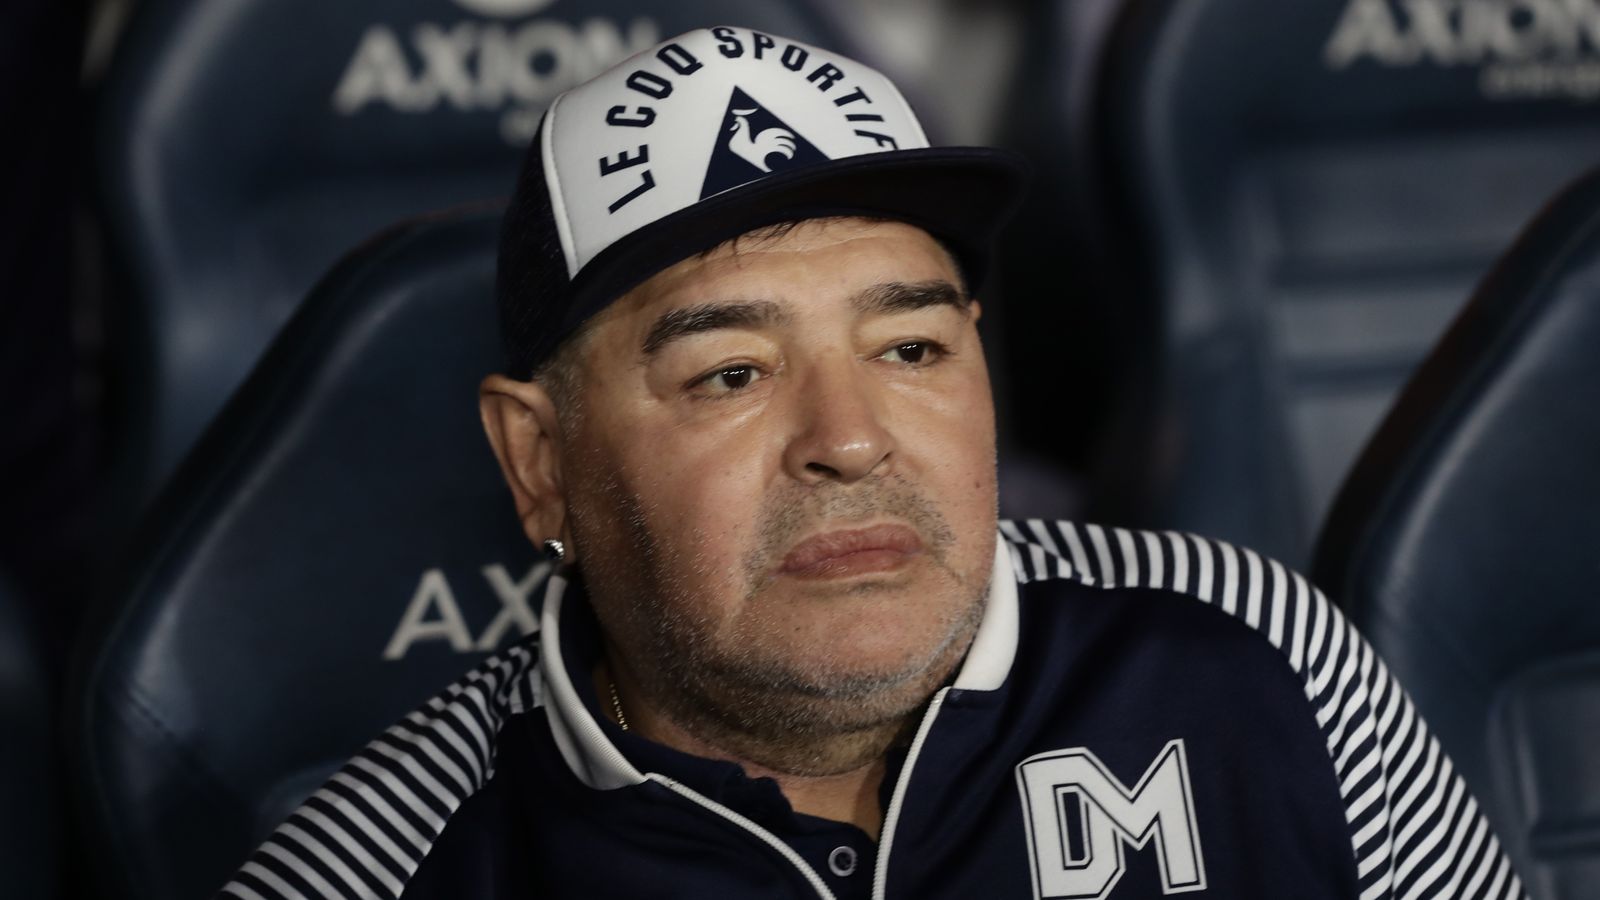 diego-maradona-argentina-legend-admitted-to-hospital-local-reports-say